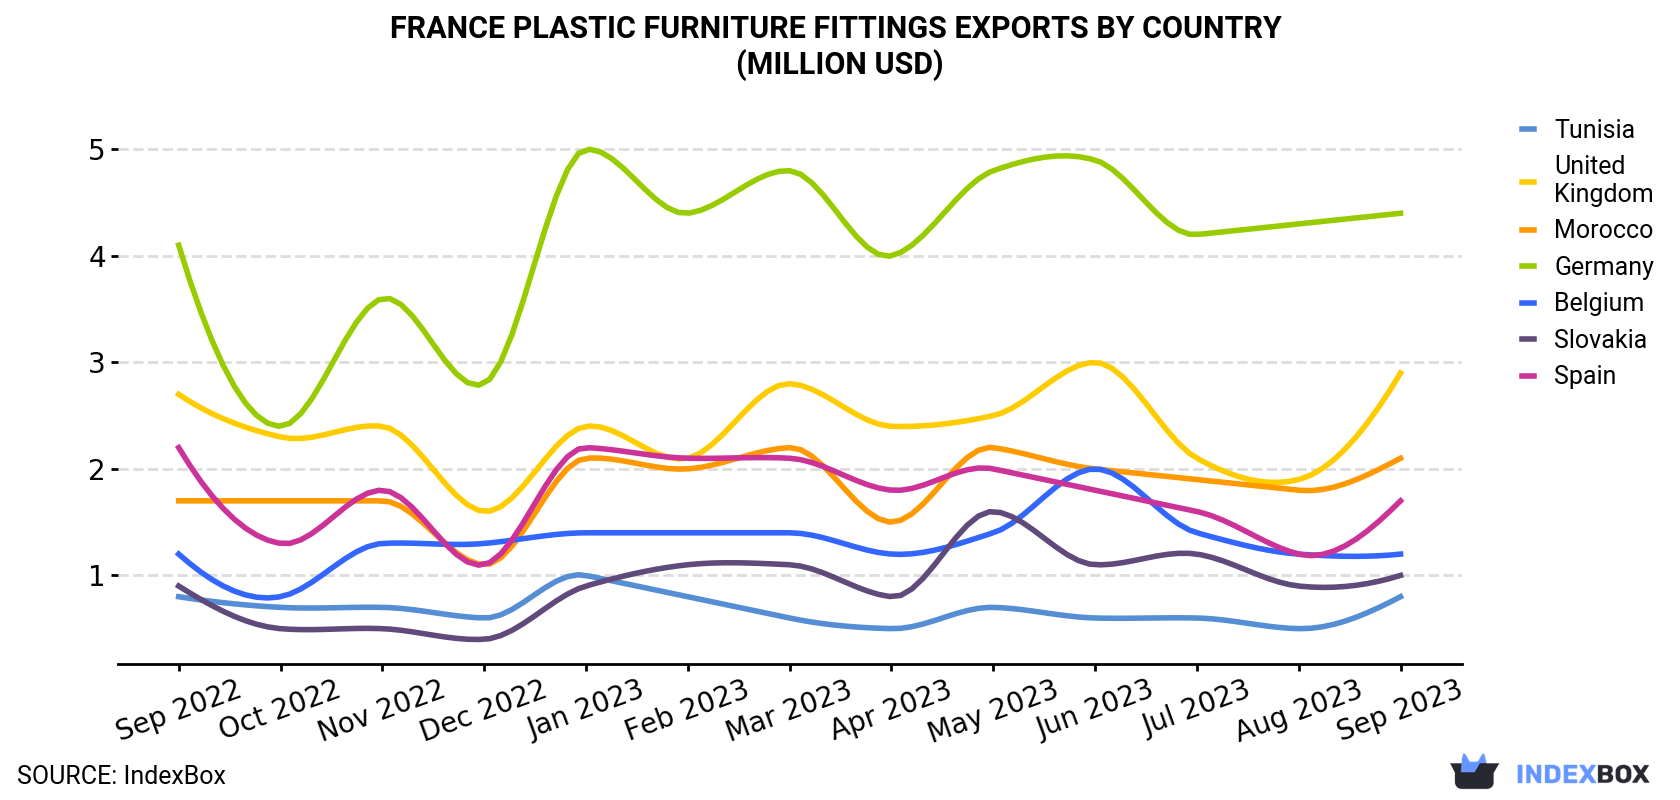 France Plastic Furniture Fittings Exports By Country (Million USD)